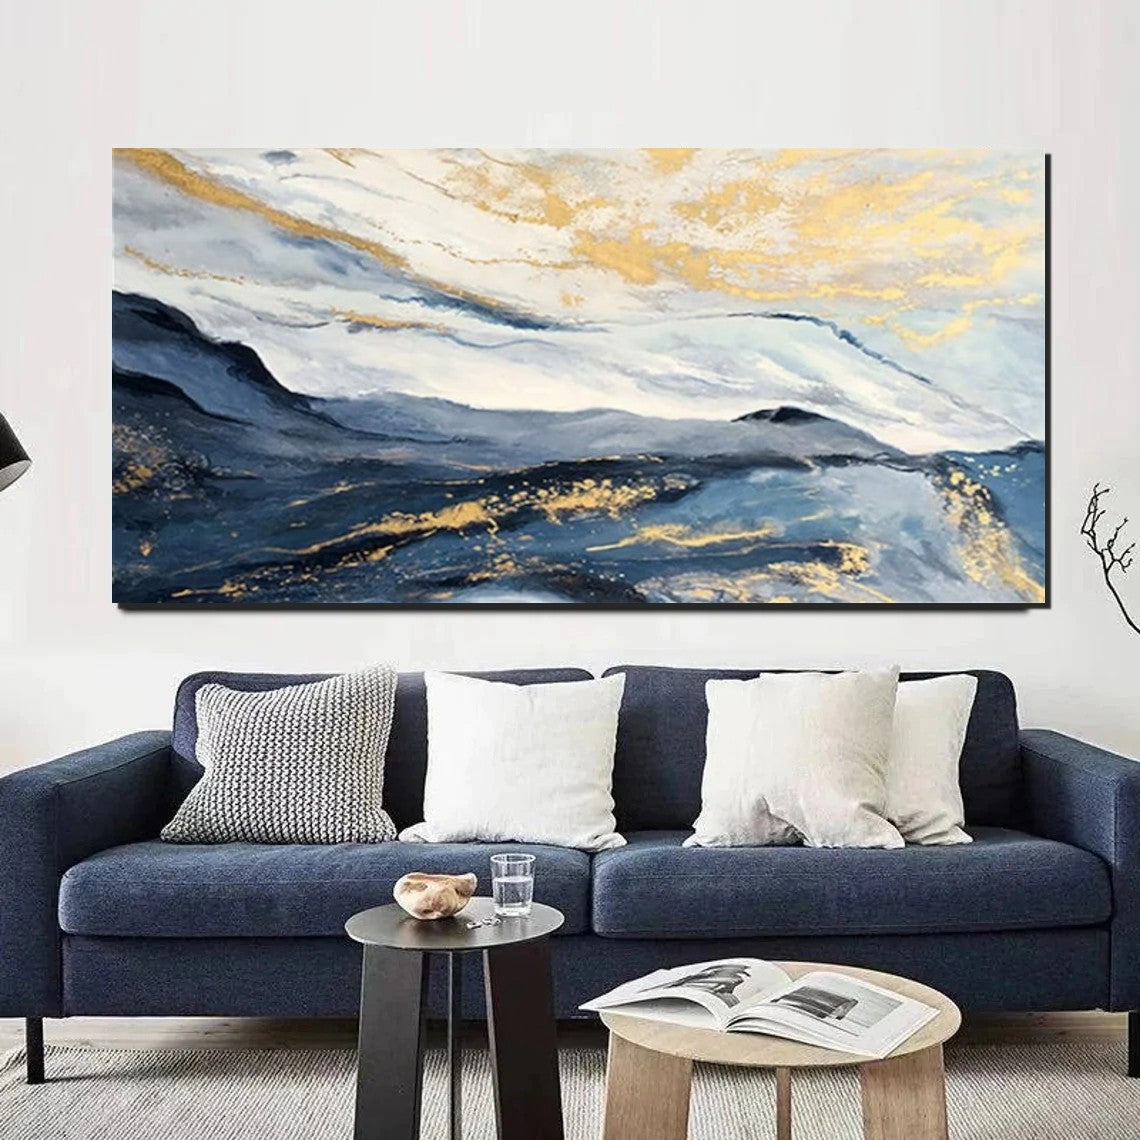 Large Painting on Canvas, Living Room Wall Art Paintings, Acrylic Abst ...